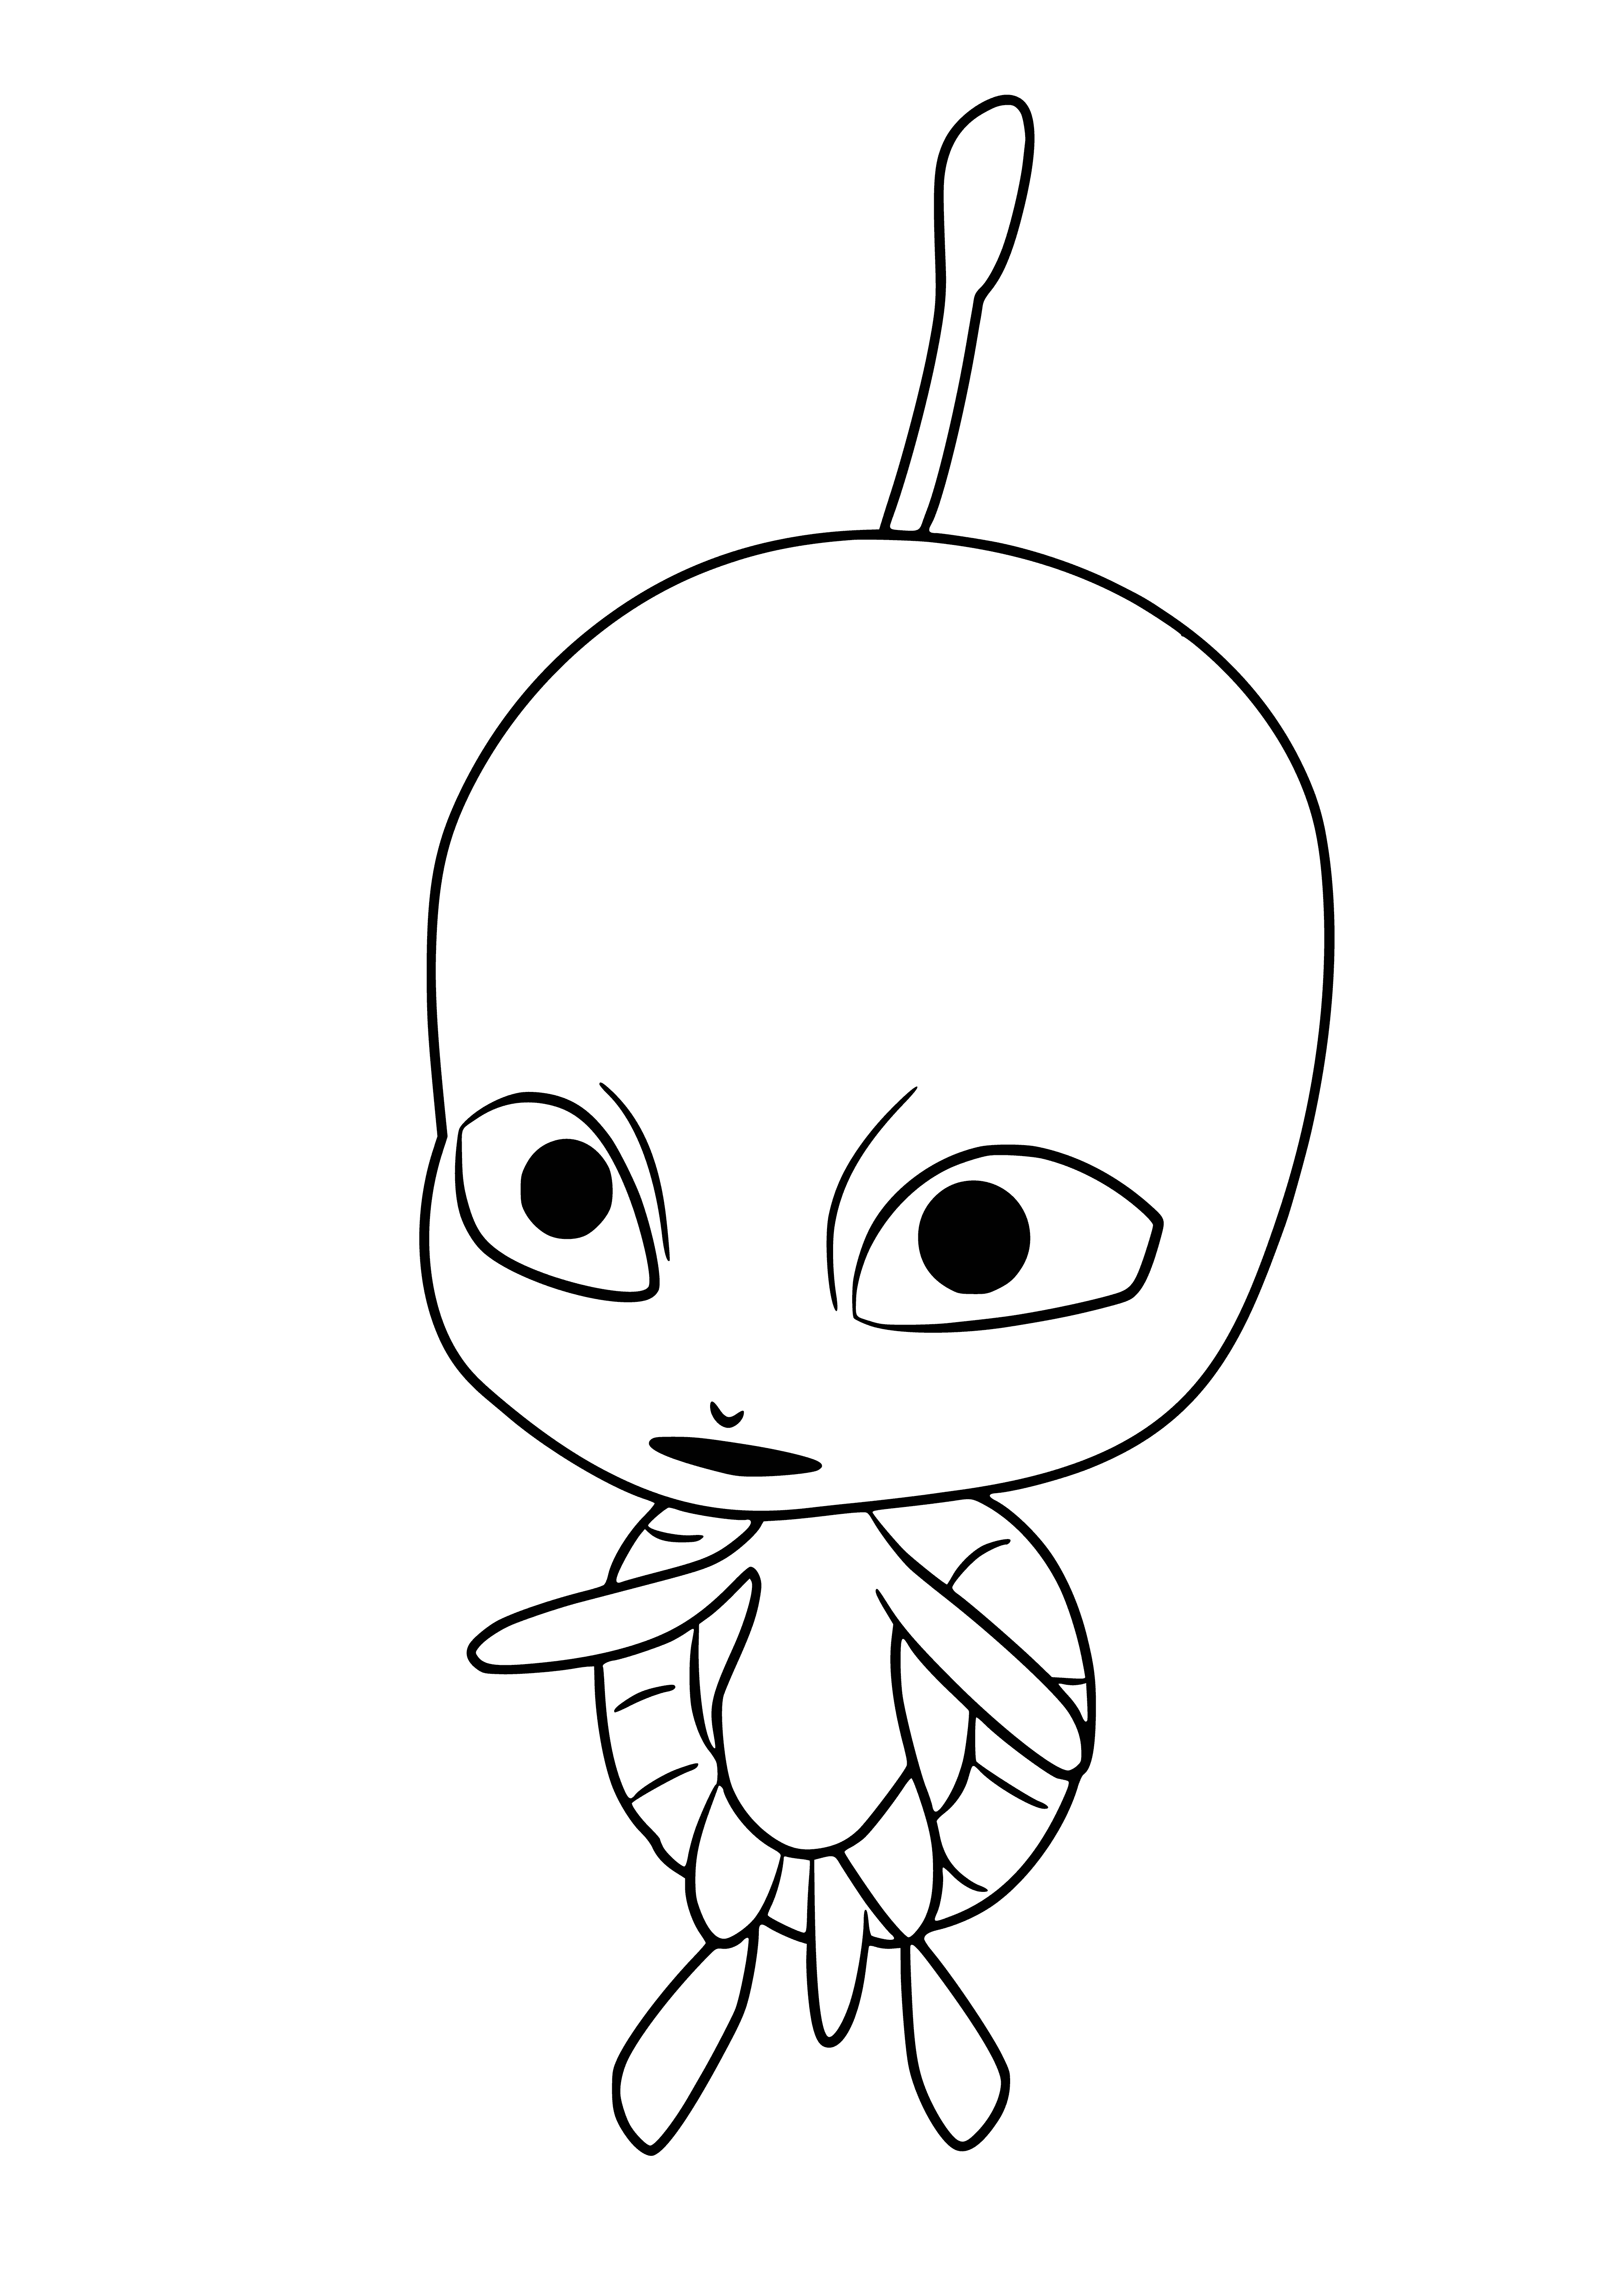 coloring page: A blue turtle kwami with yellow spots stands on a green leaf in a field of flowers.